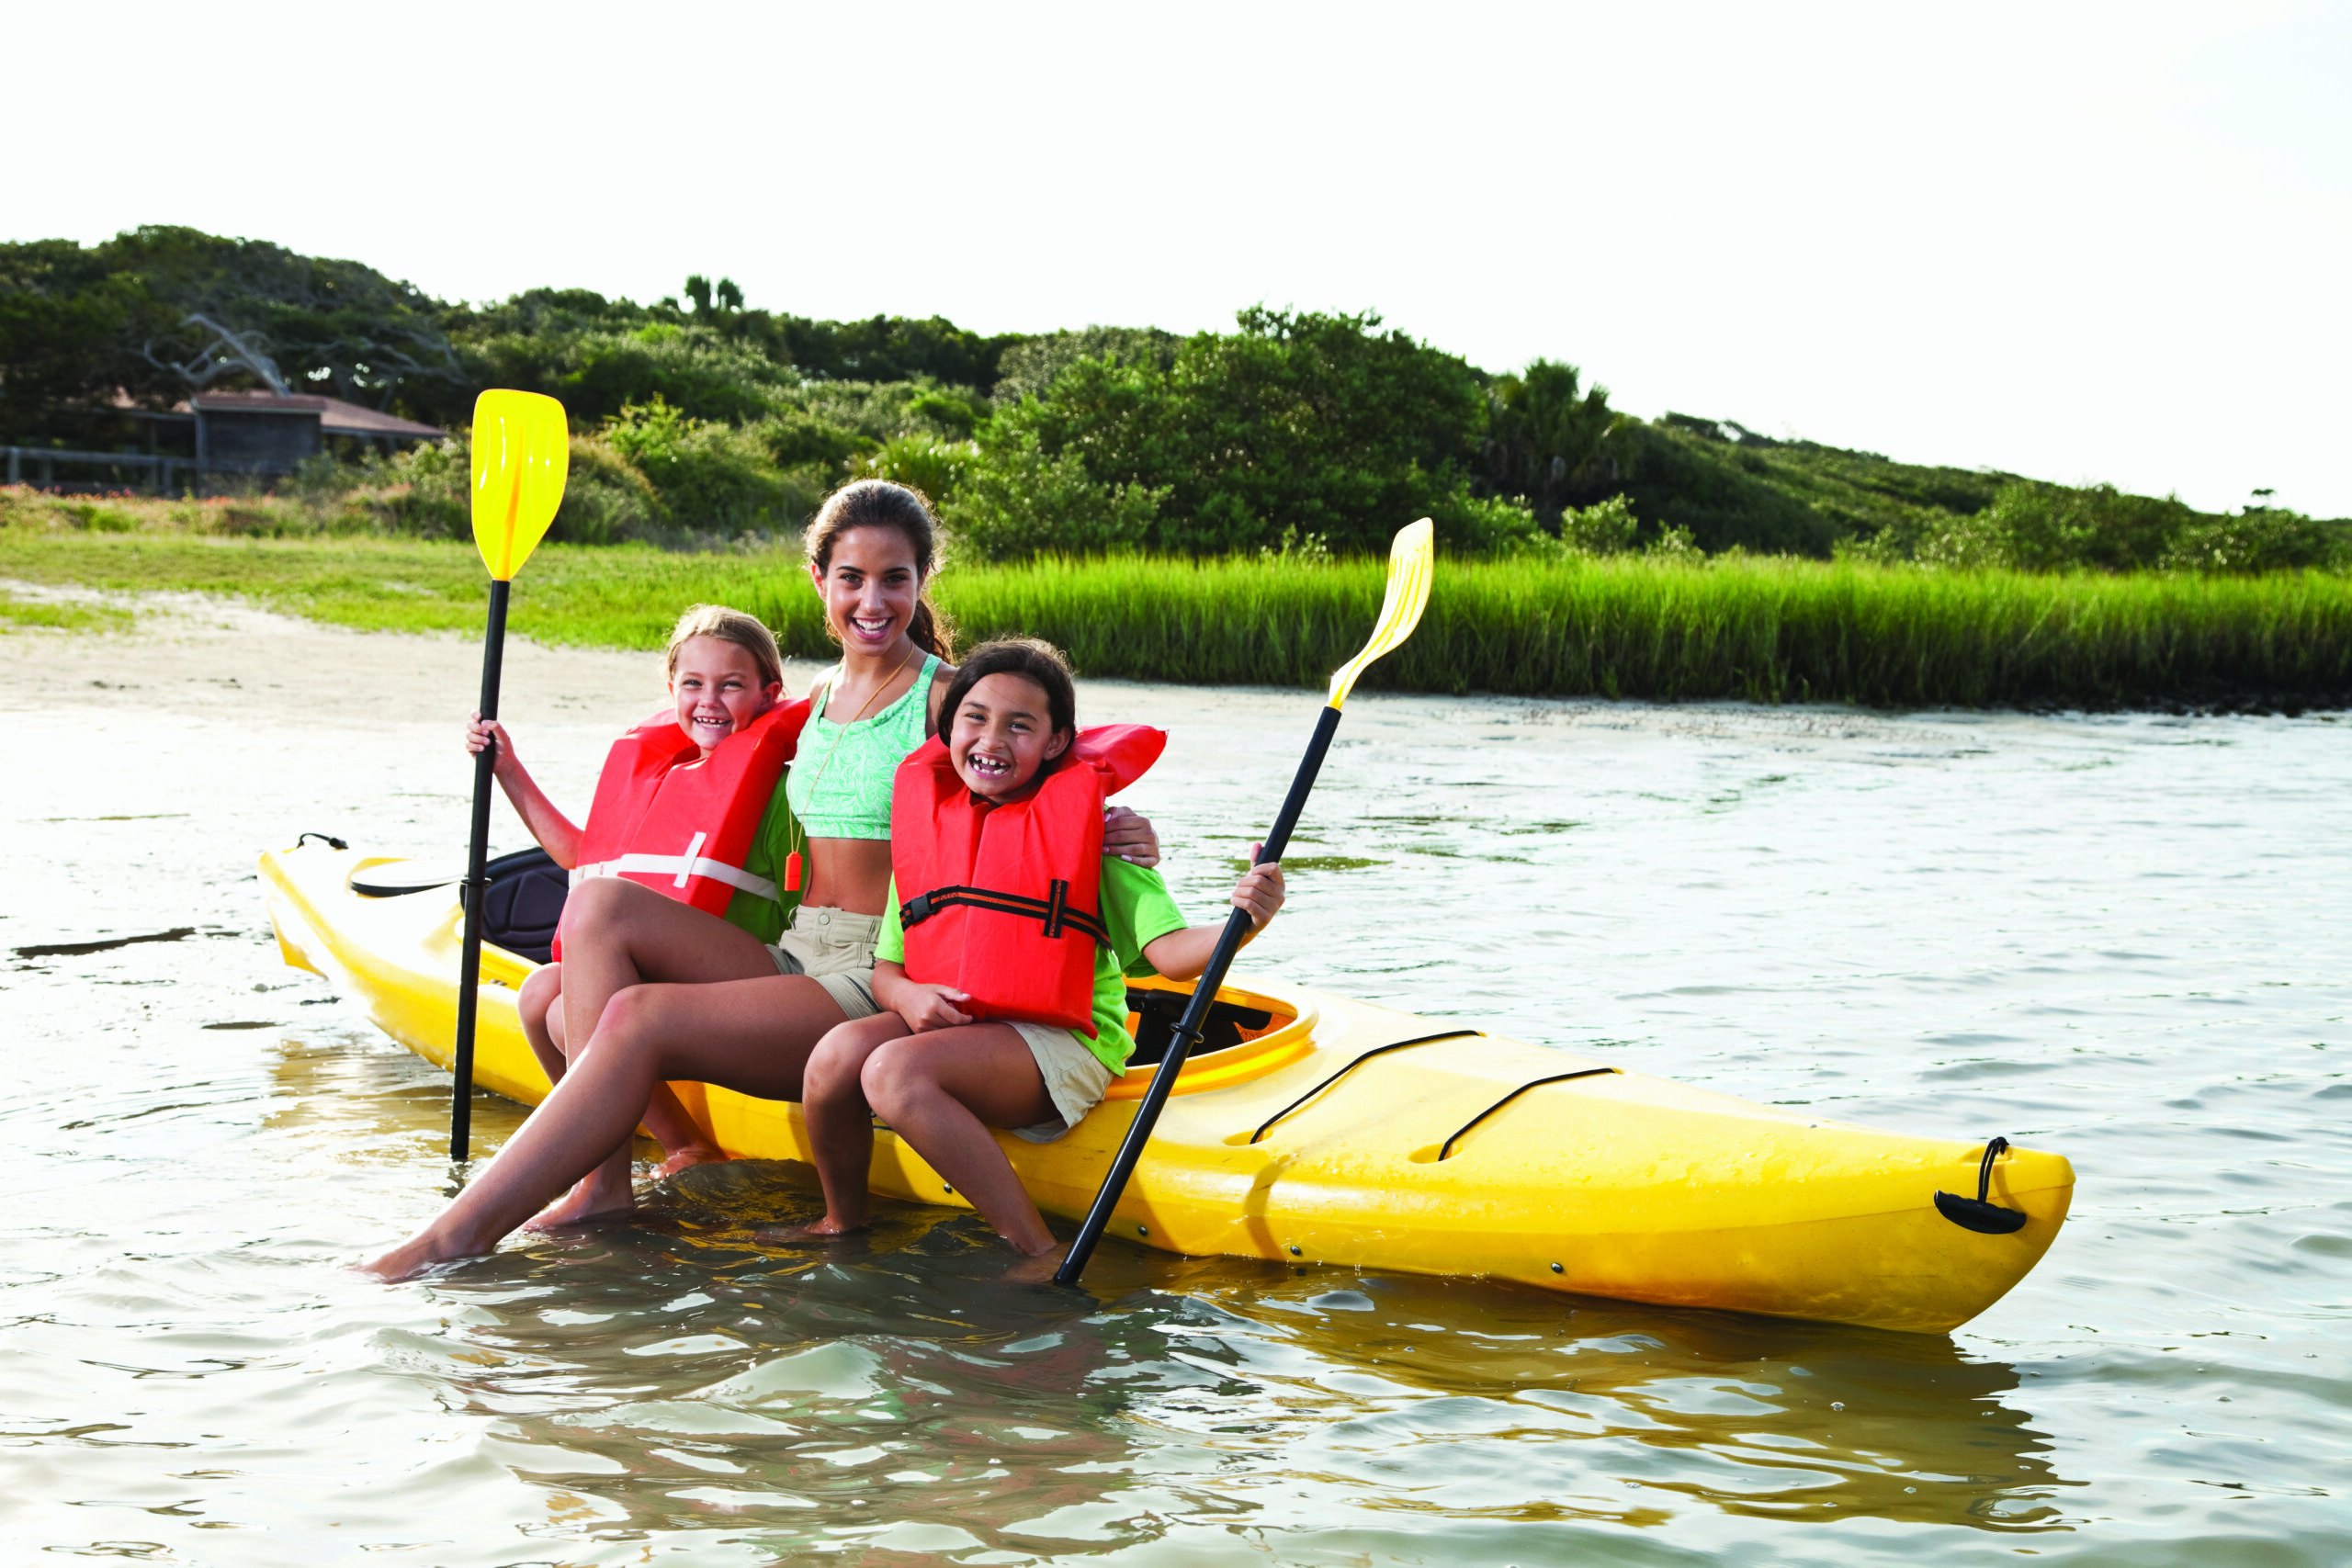 Teenage girl (17 years) with little girls (8-9 years) sitting on kayak in summer camp